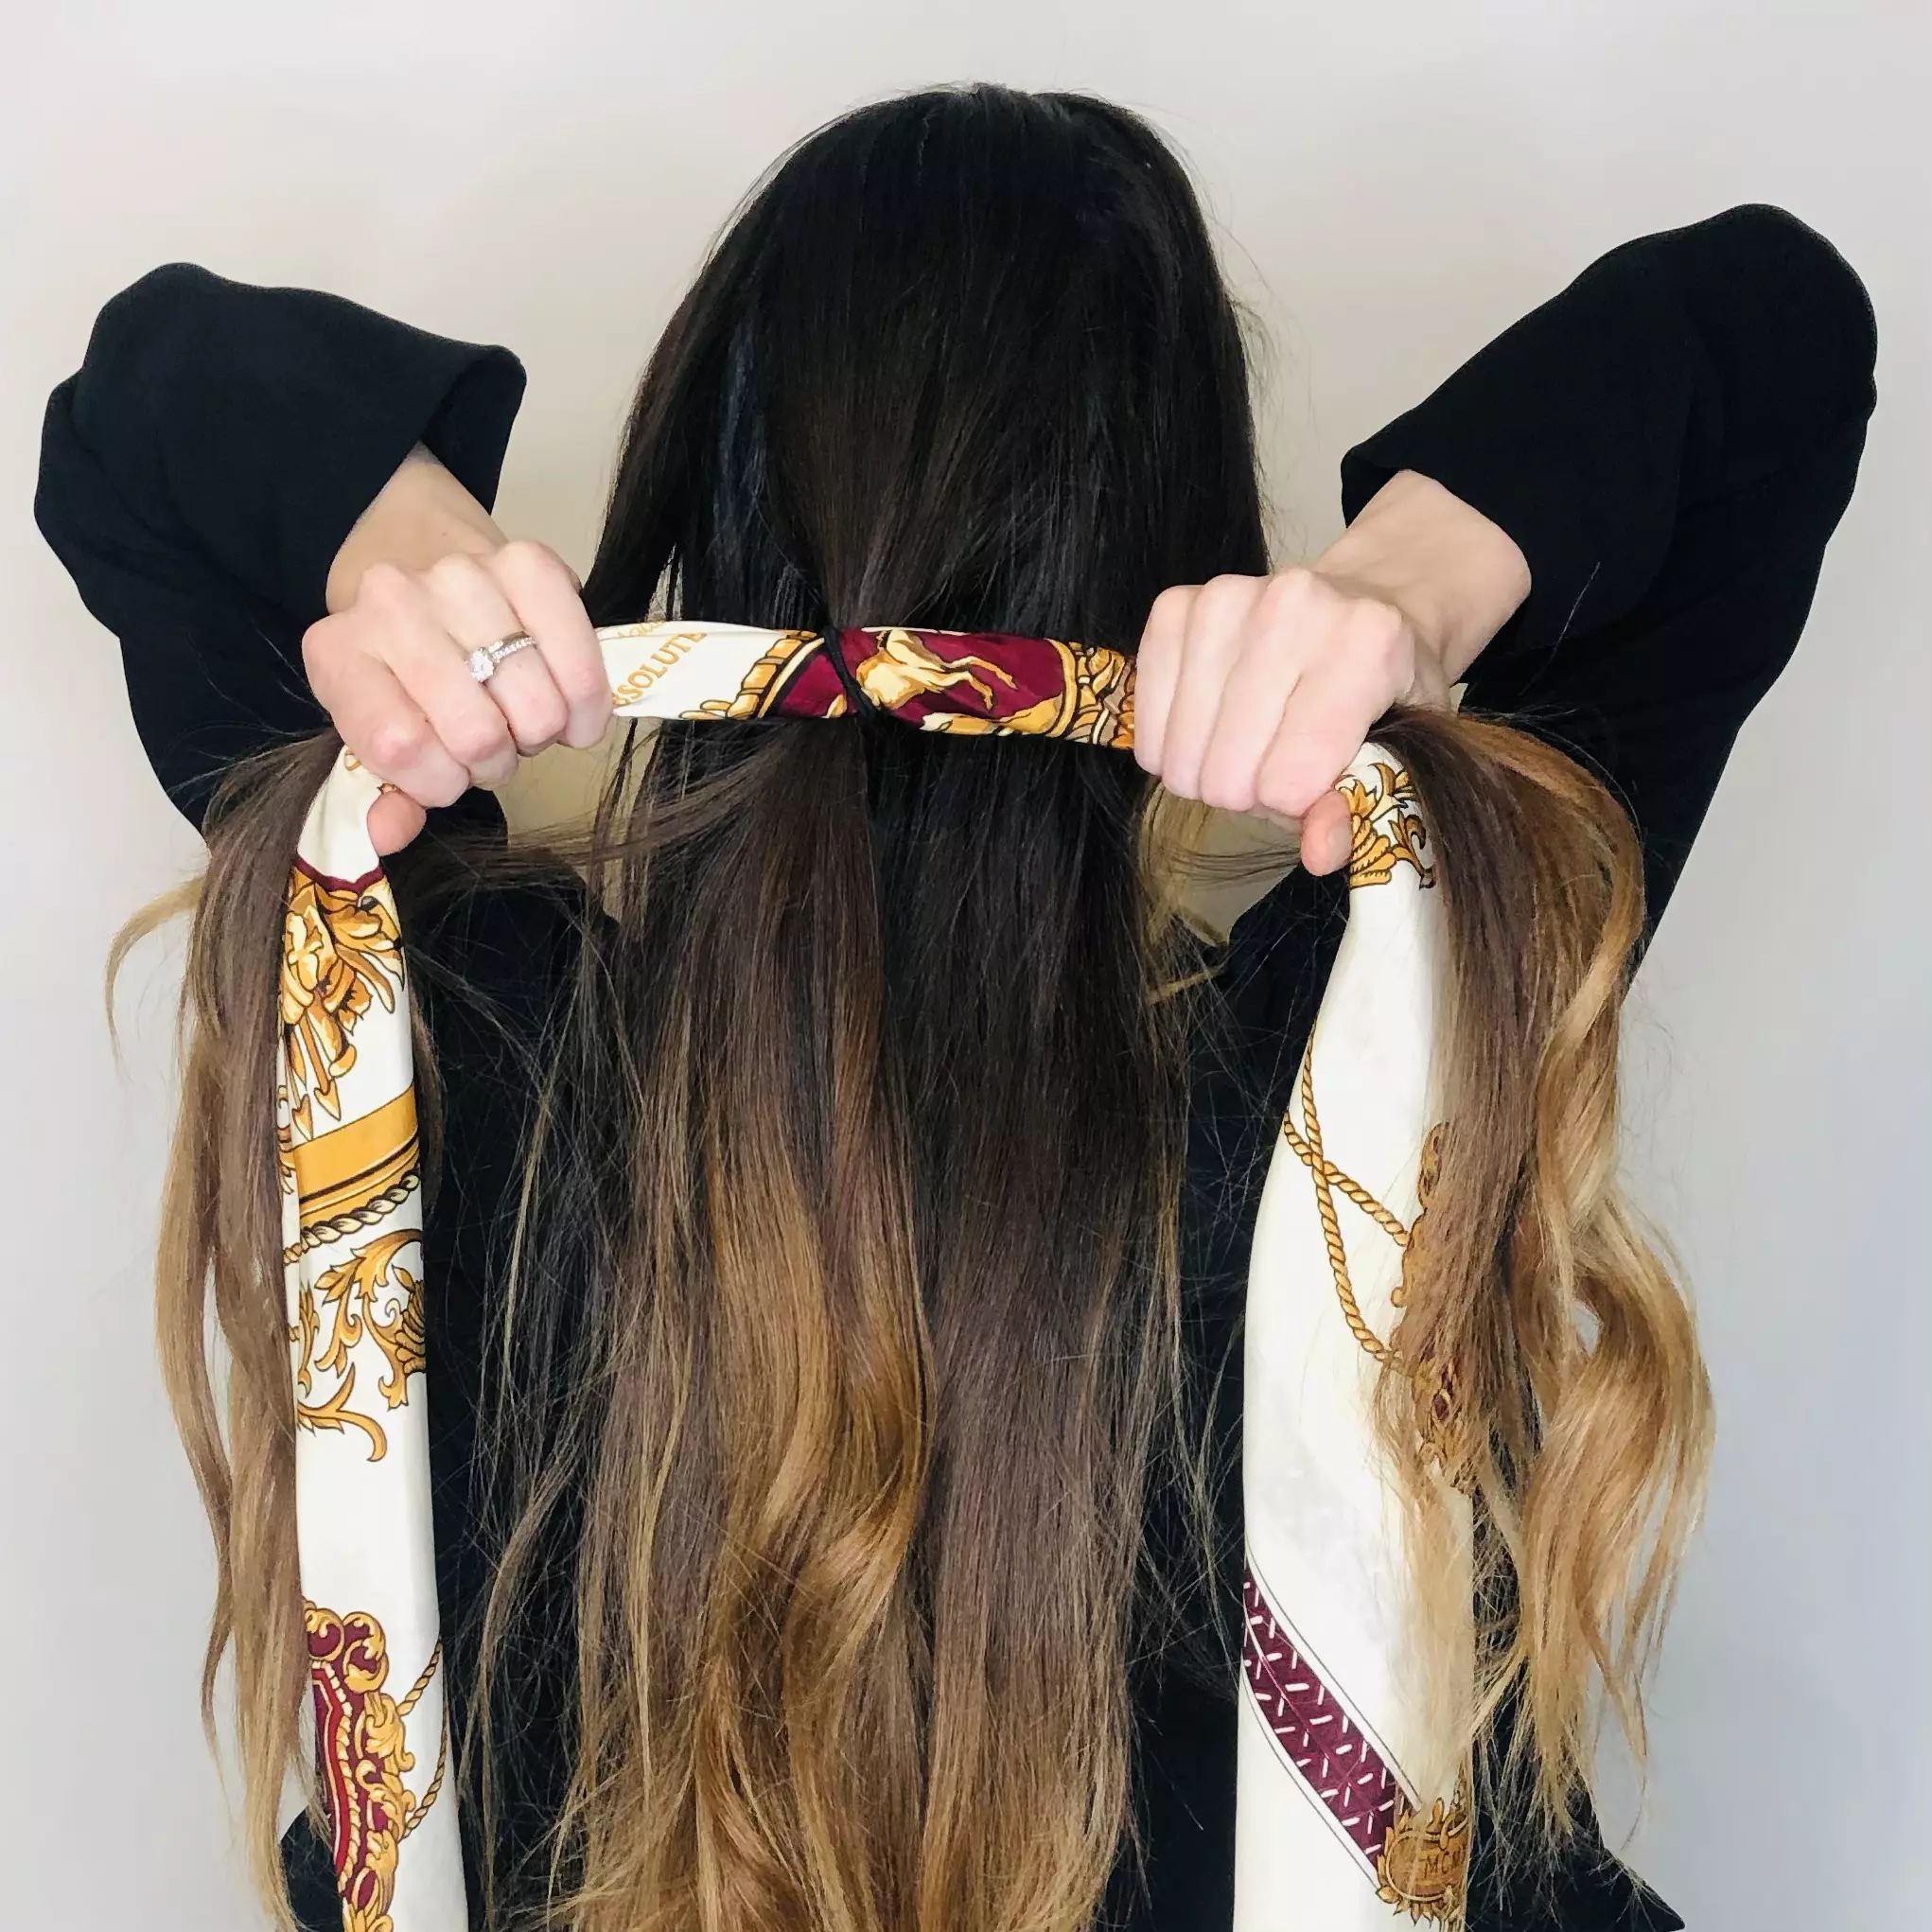 How to Braid Scarf into the Hair